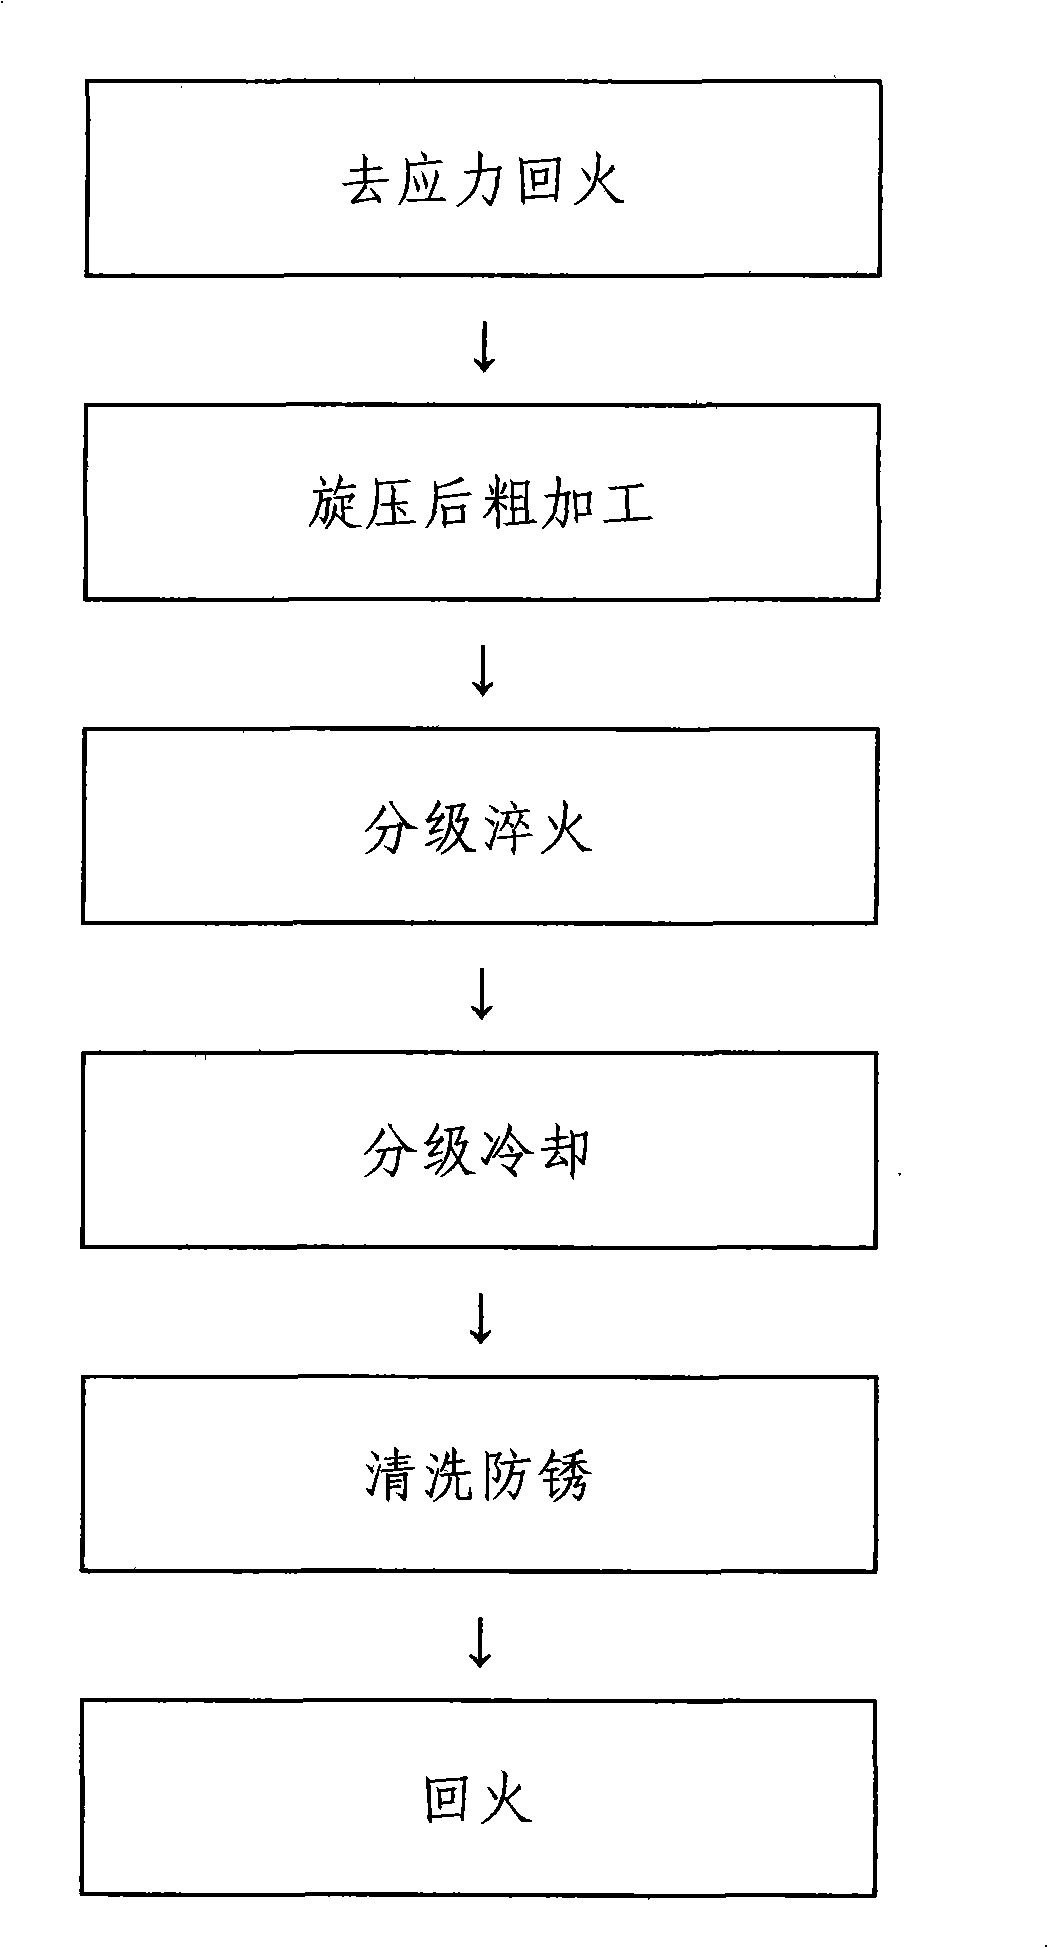 Composite heat treatment method for 30CrMnSiA steel thin wall spinning cylinder-shape element